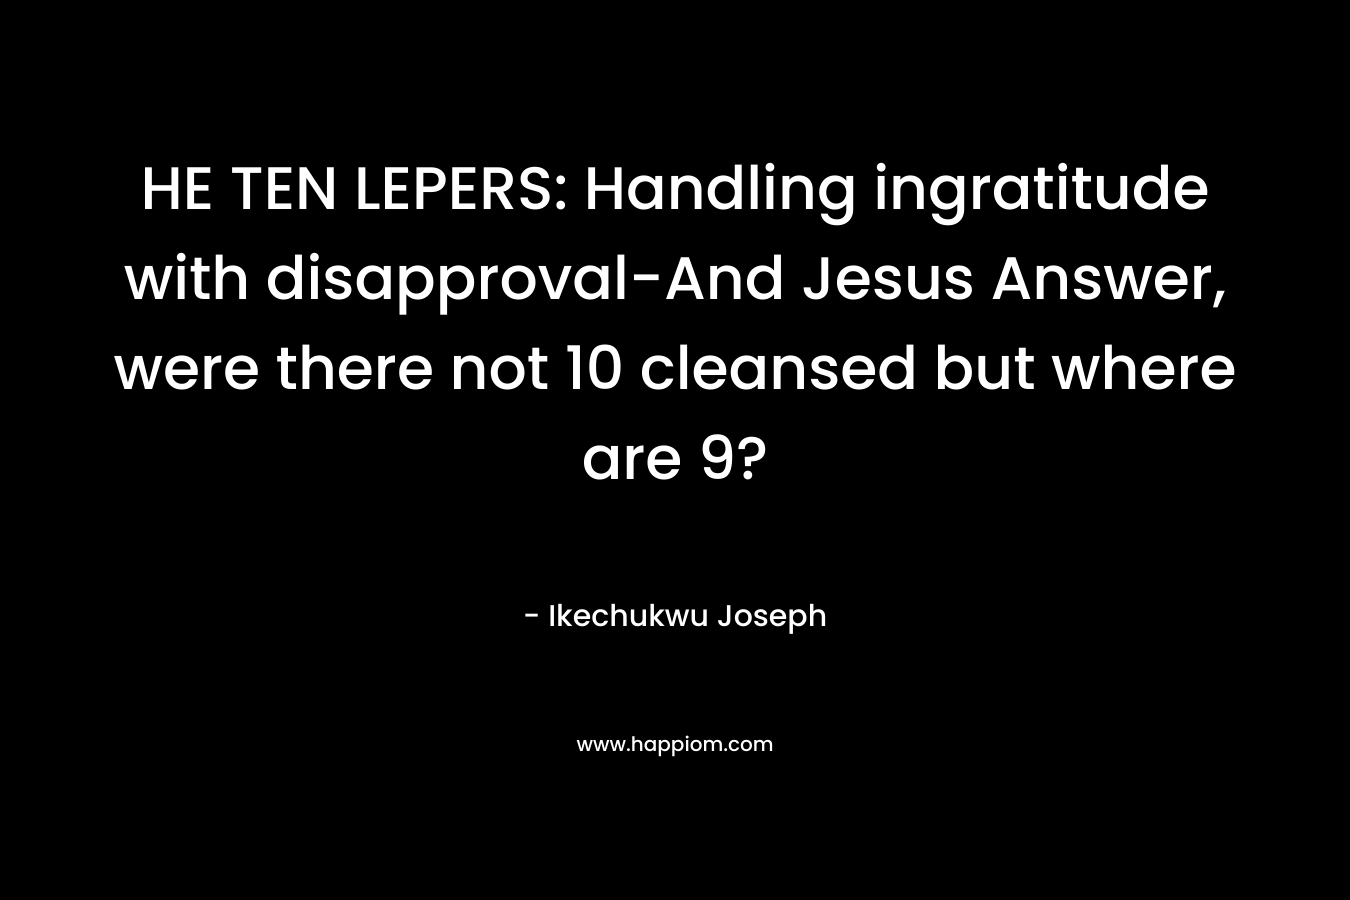 HE TEN LEPERS: Handling ingratitude with disapproval-And Jesus Answer, were there not 10 cleansed but where are 9? – Ikechukwu Joseph